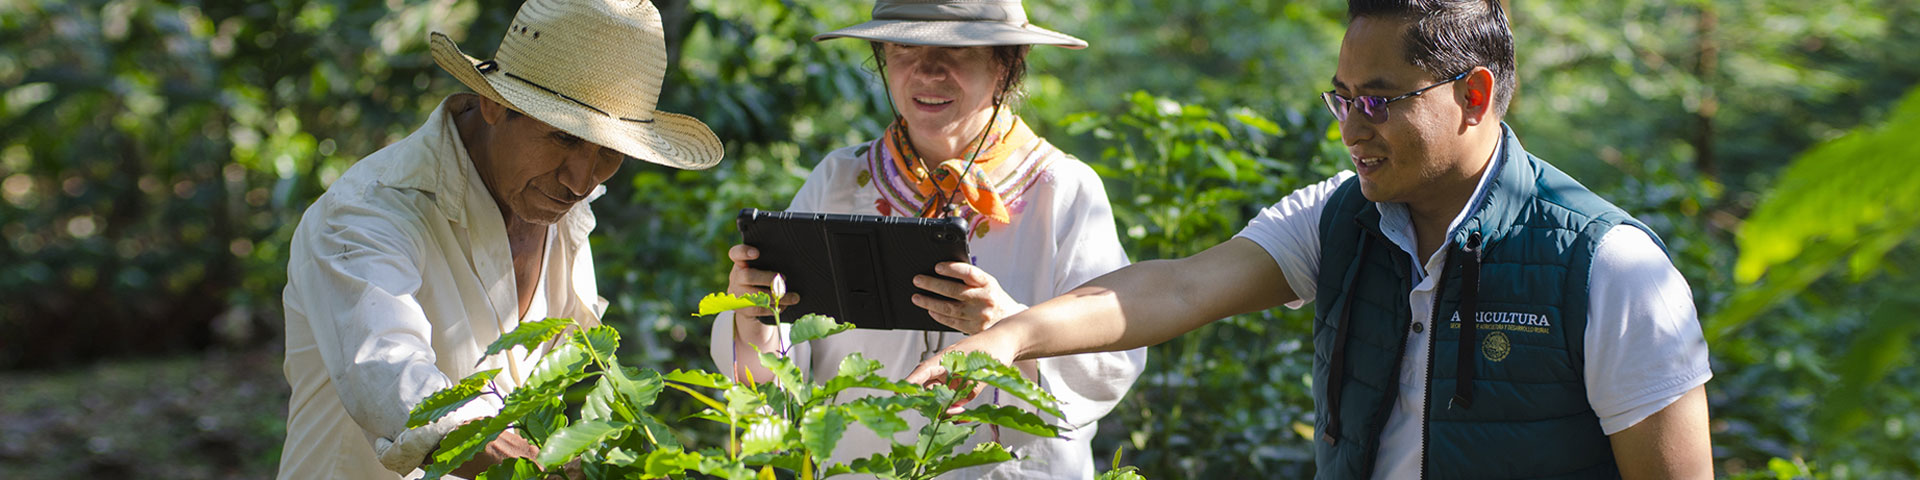 A woman holding a tablet in her hands and looking at a plant. Two men standing to her right and left are explaining something about the plant.